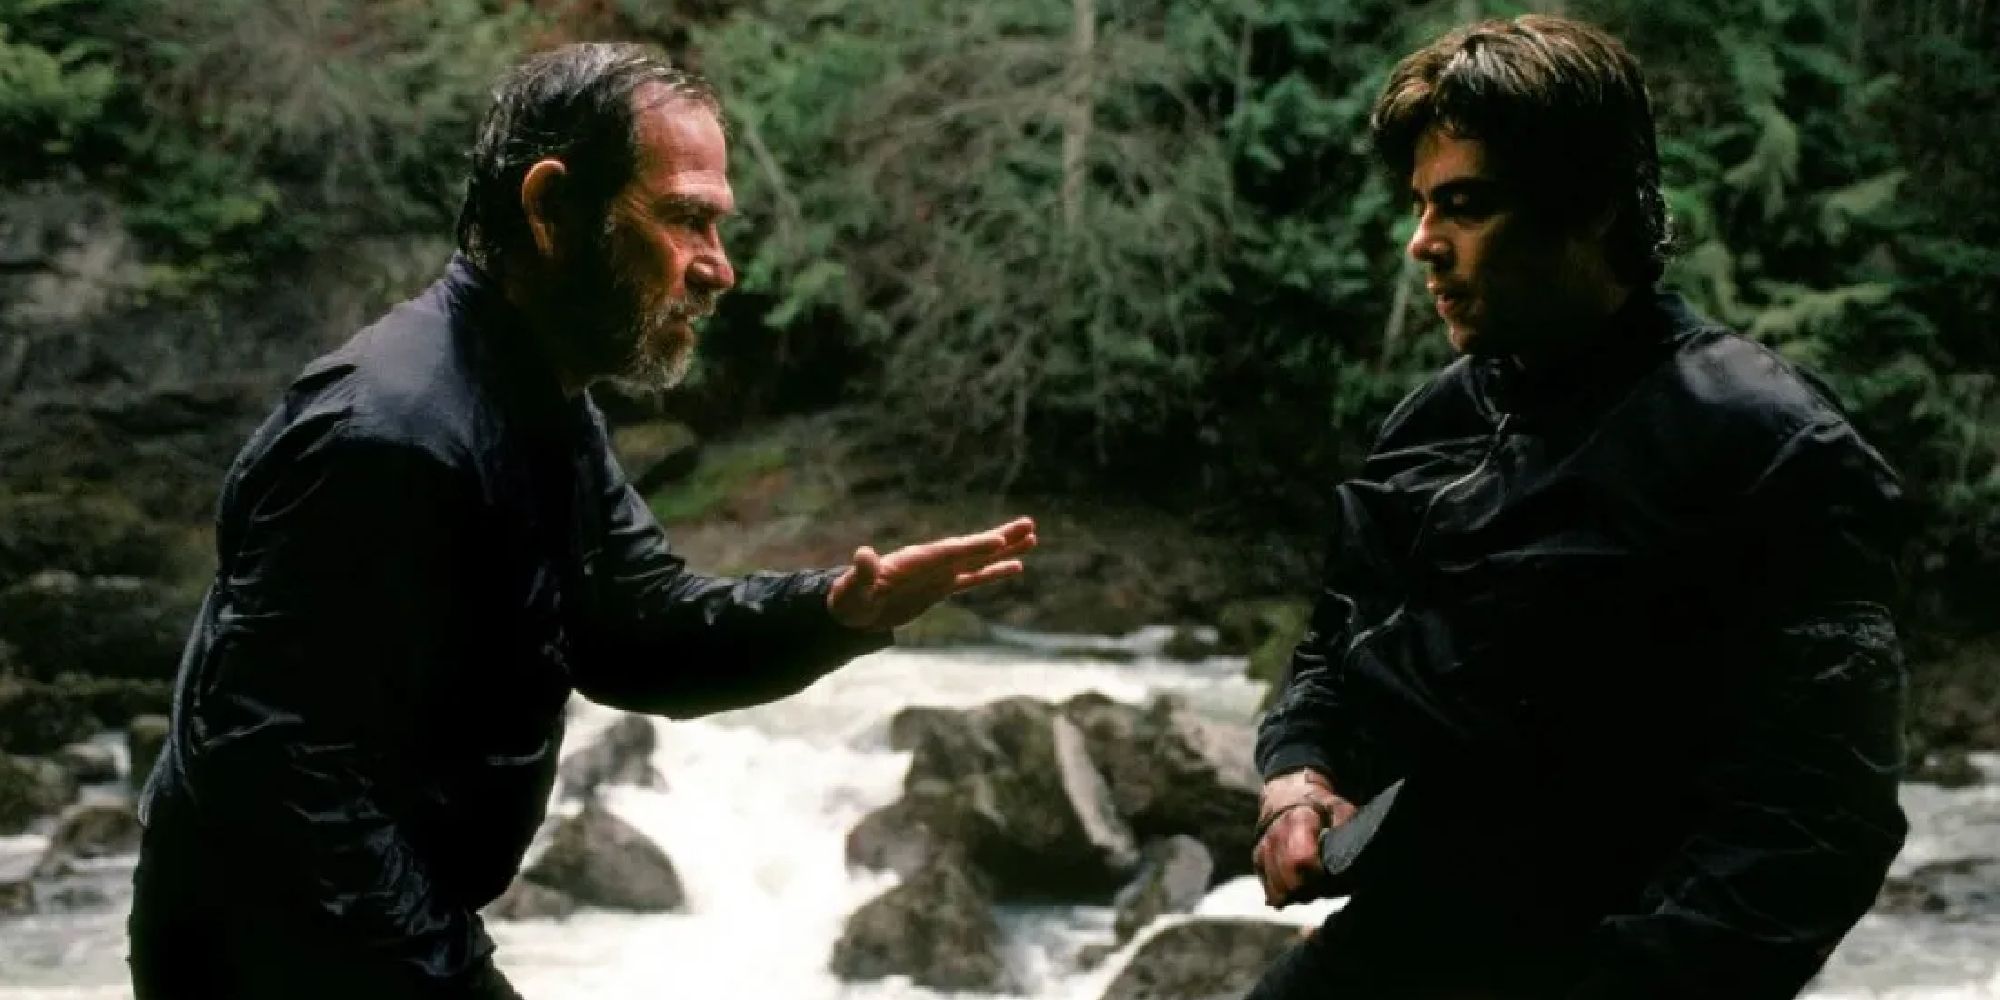 Tommy Lee Jones and Benicio Del Toro as L.T. Bonham and Aaron Hallam arguing next to a waterfall in The Hunted.